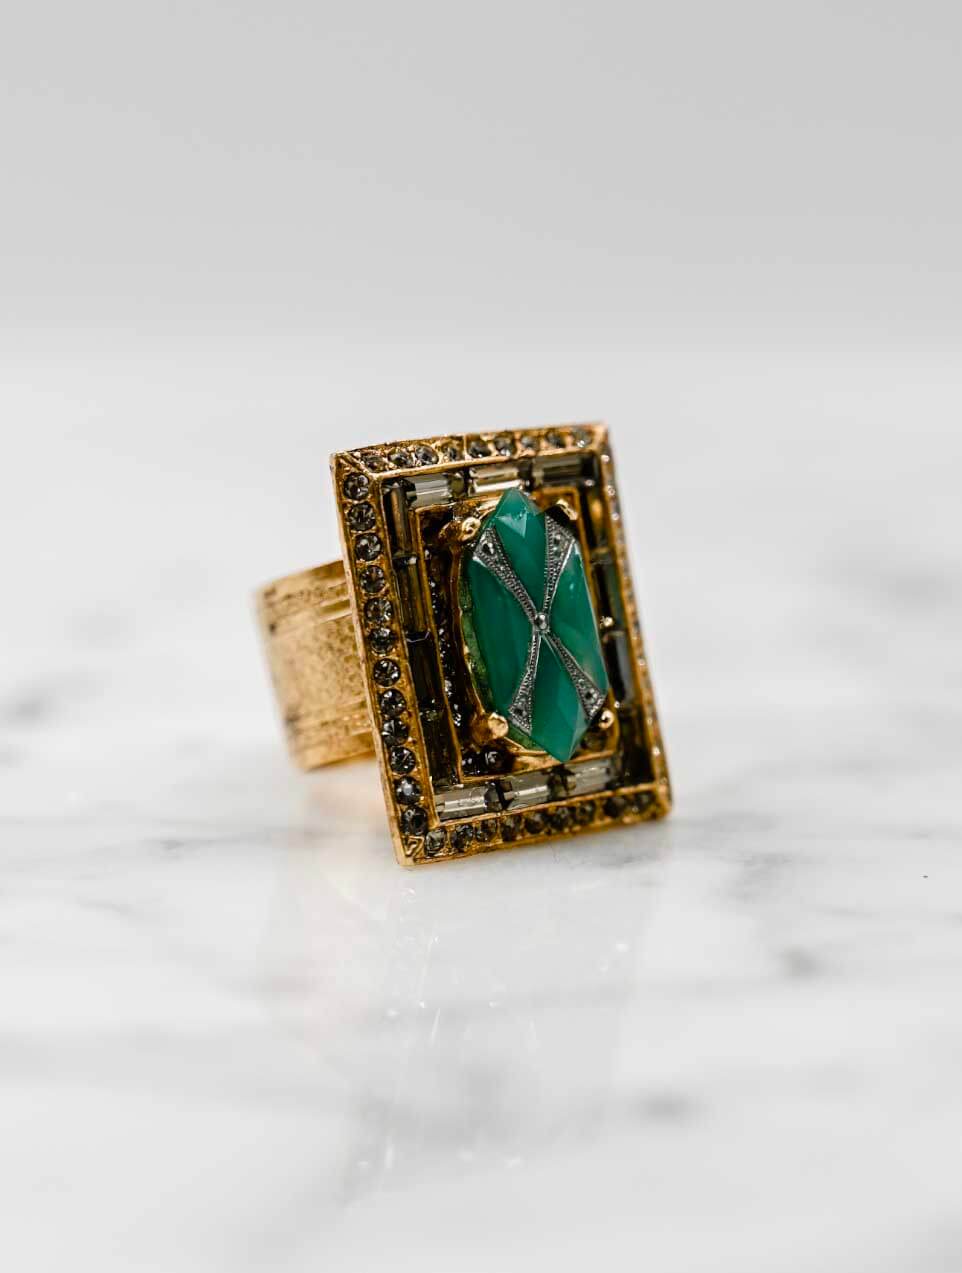 Antique Ring with Large Green Stone in Gold